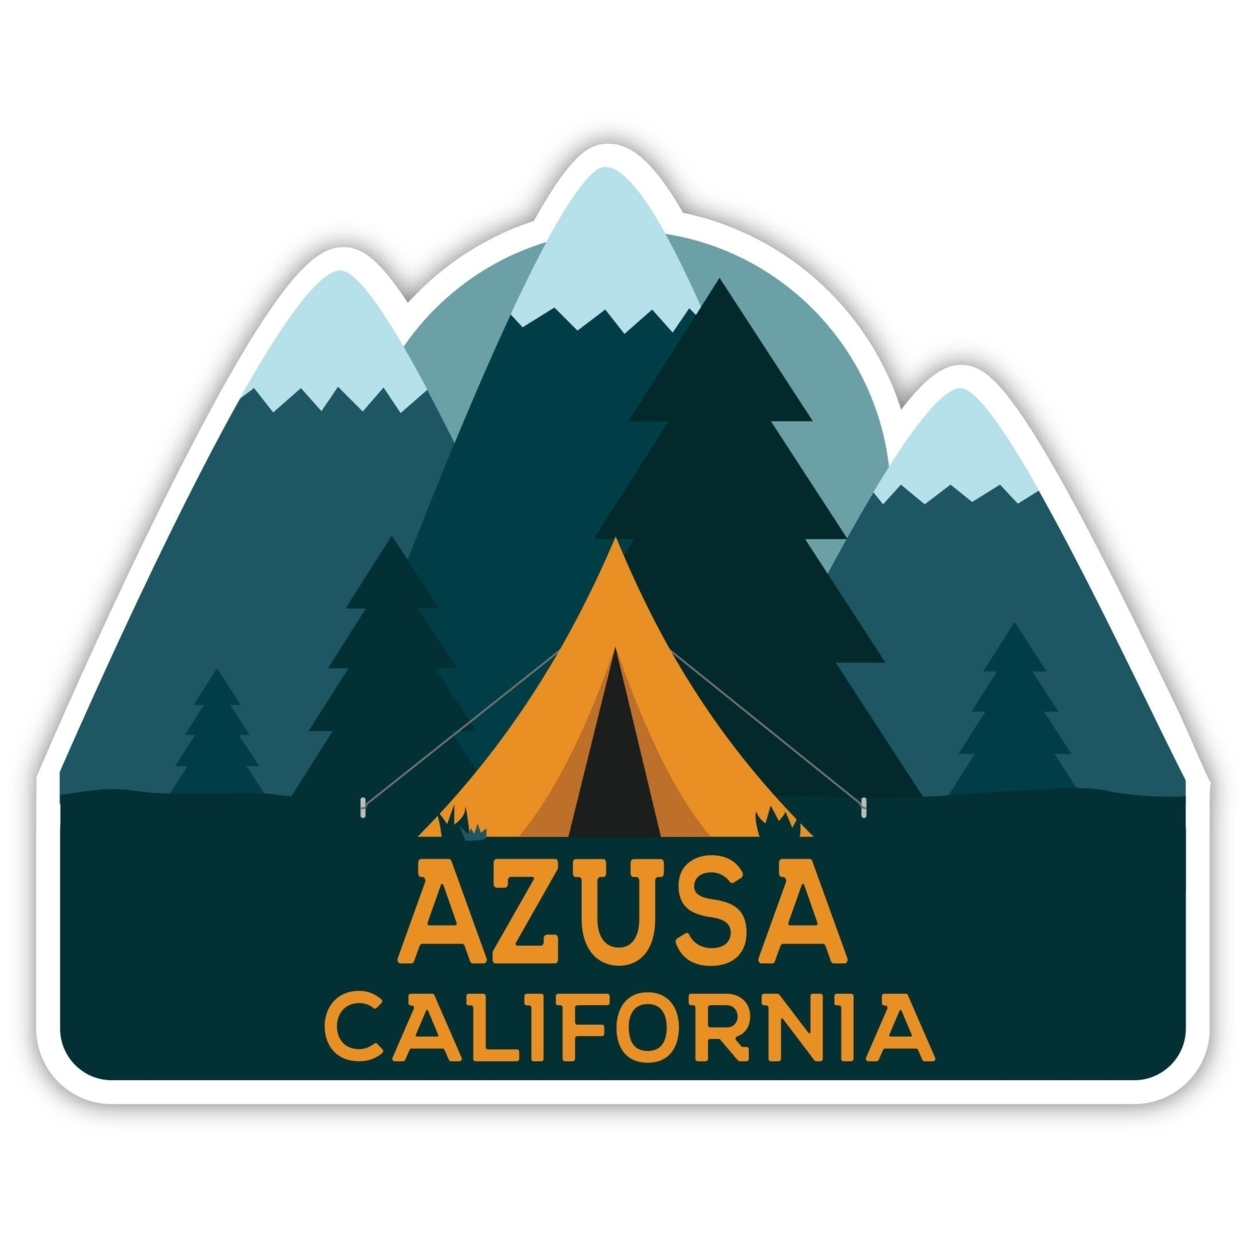 Azusa California Souvenir Decorative Stickers (Choose Theme And Size) - 4-Pack, 2-Inch, Tent